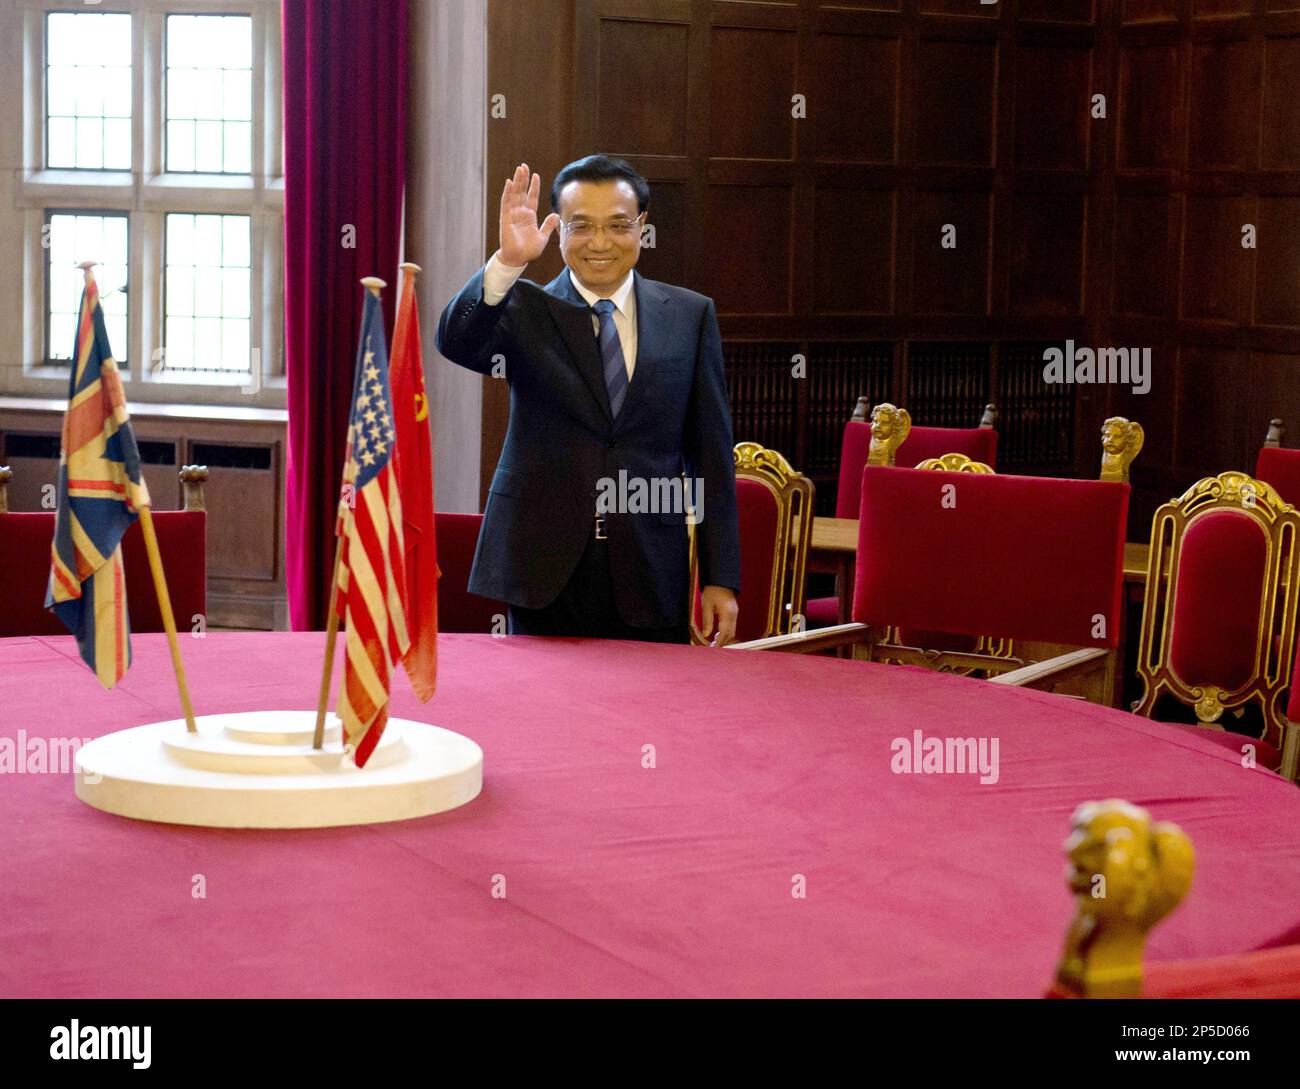 Chinese Prime Minister Li Keqiang, waves as he stands behind the conference table of the 'Potsdam Conference' during his visit at Cecilienhof Castle where, after WWII in 1945, the Potsdam Conference of the Allies took place, in Potsdam, Germany Sunday May 26. 2013. (AP Photo/ Soeren Stache, Pool) Stock Photo